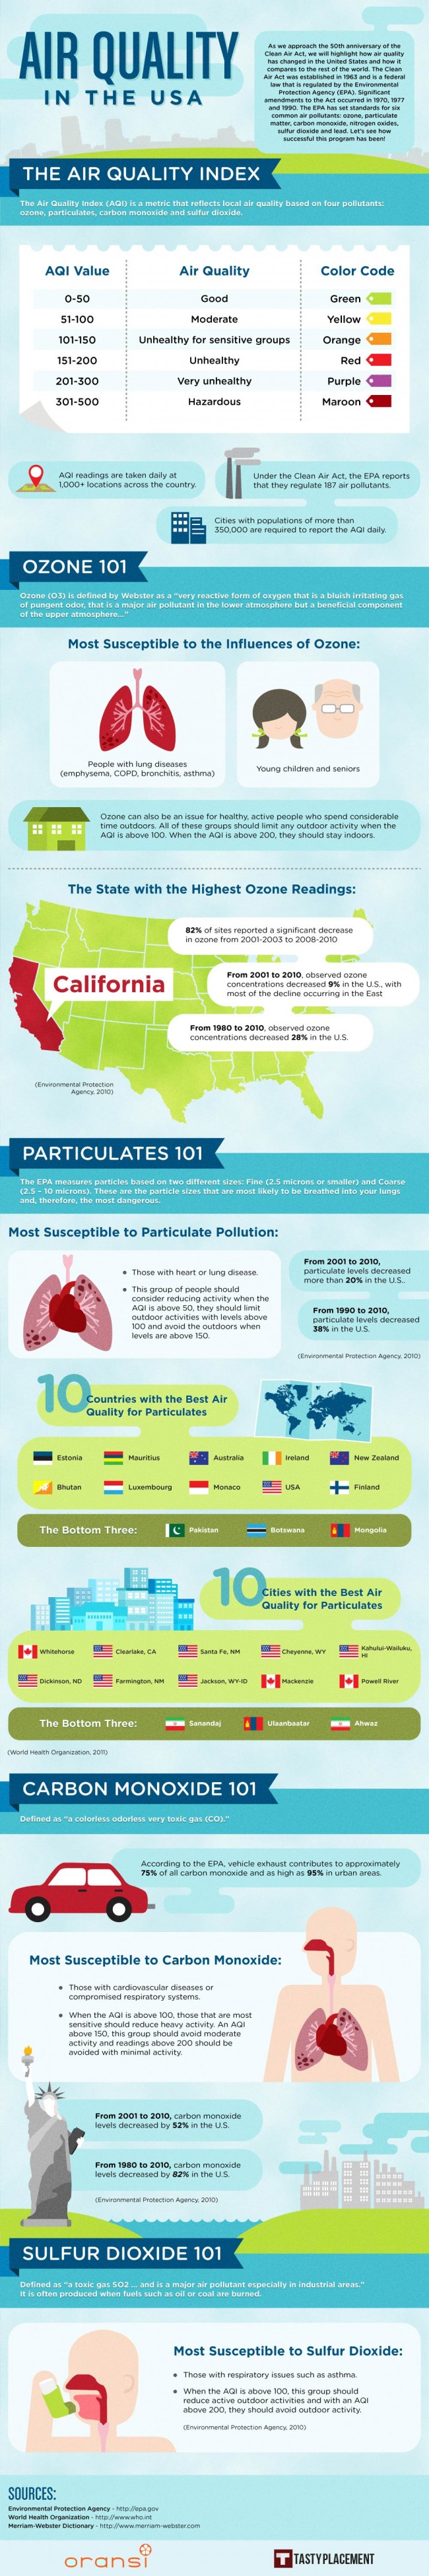 air quality in the usa infographic 650x3900 Air Quality in the USA [Infographic]